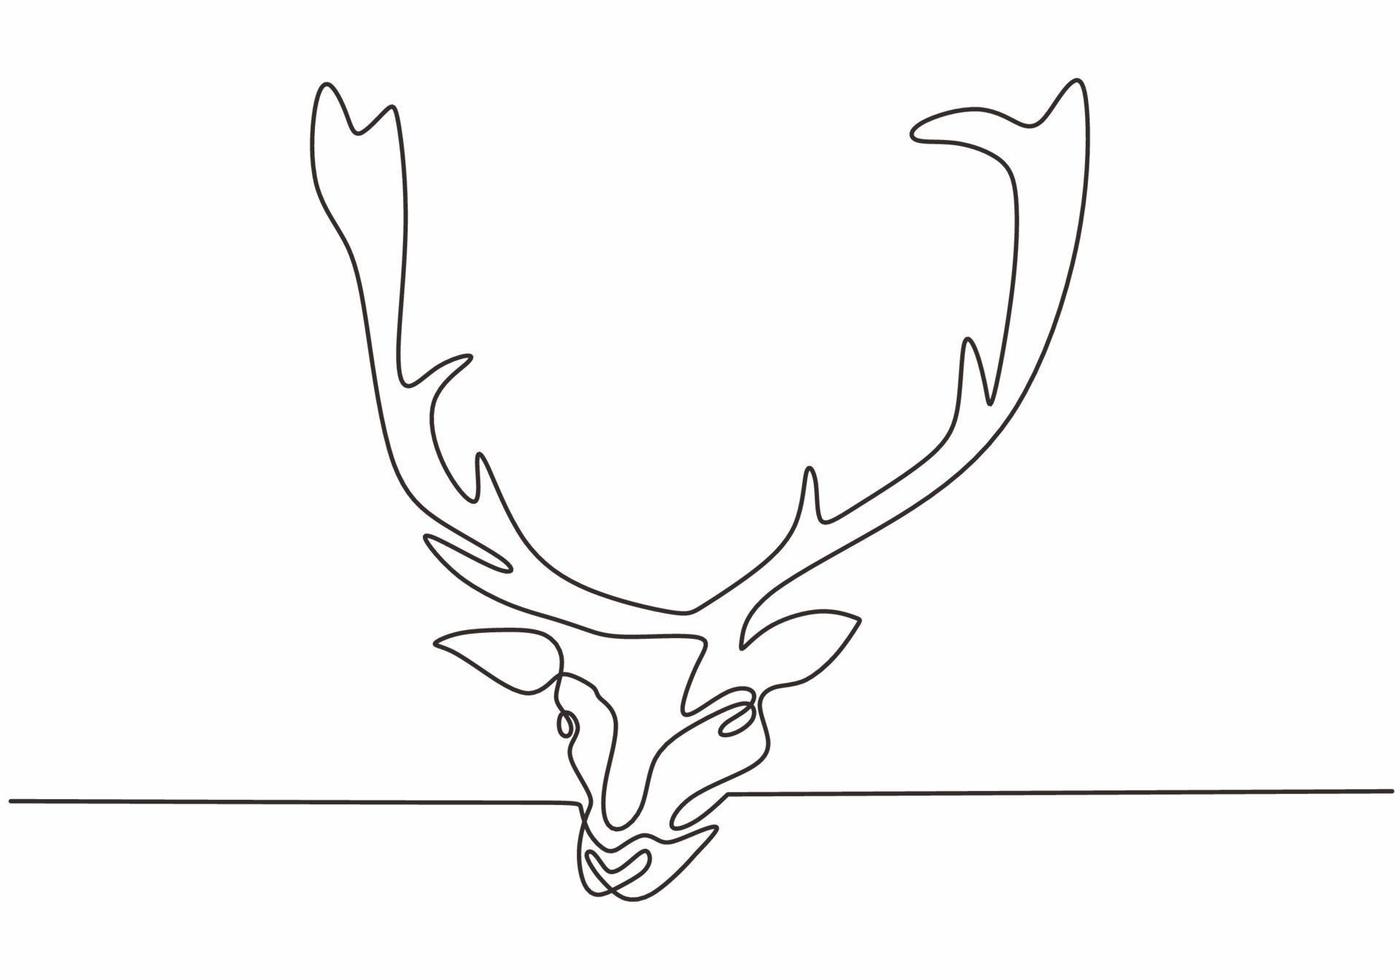 Continuous line drawing of reindeer head vector. vector